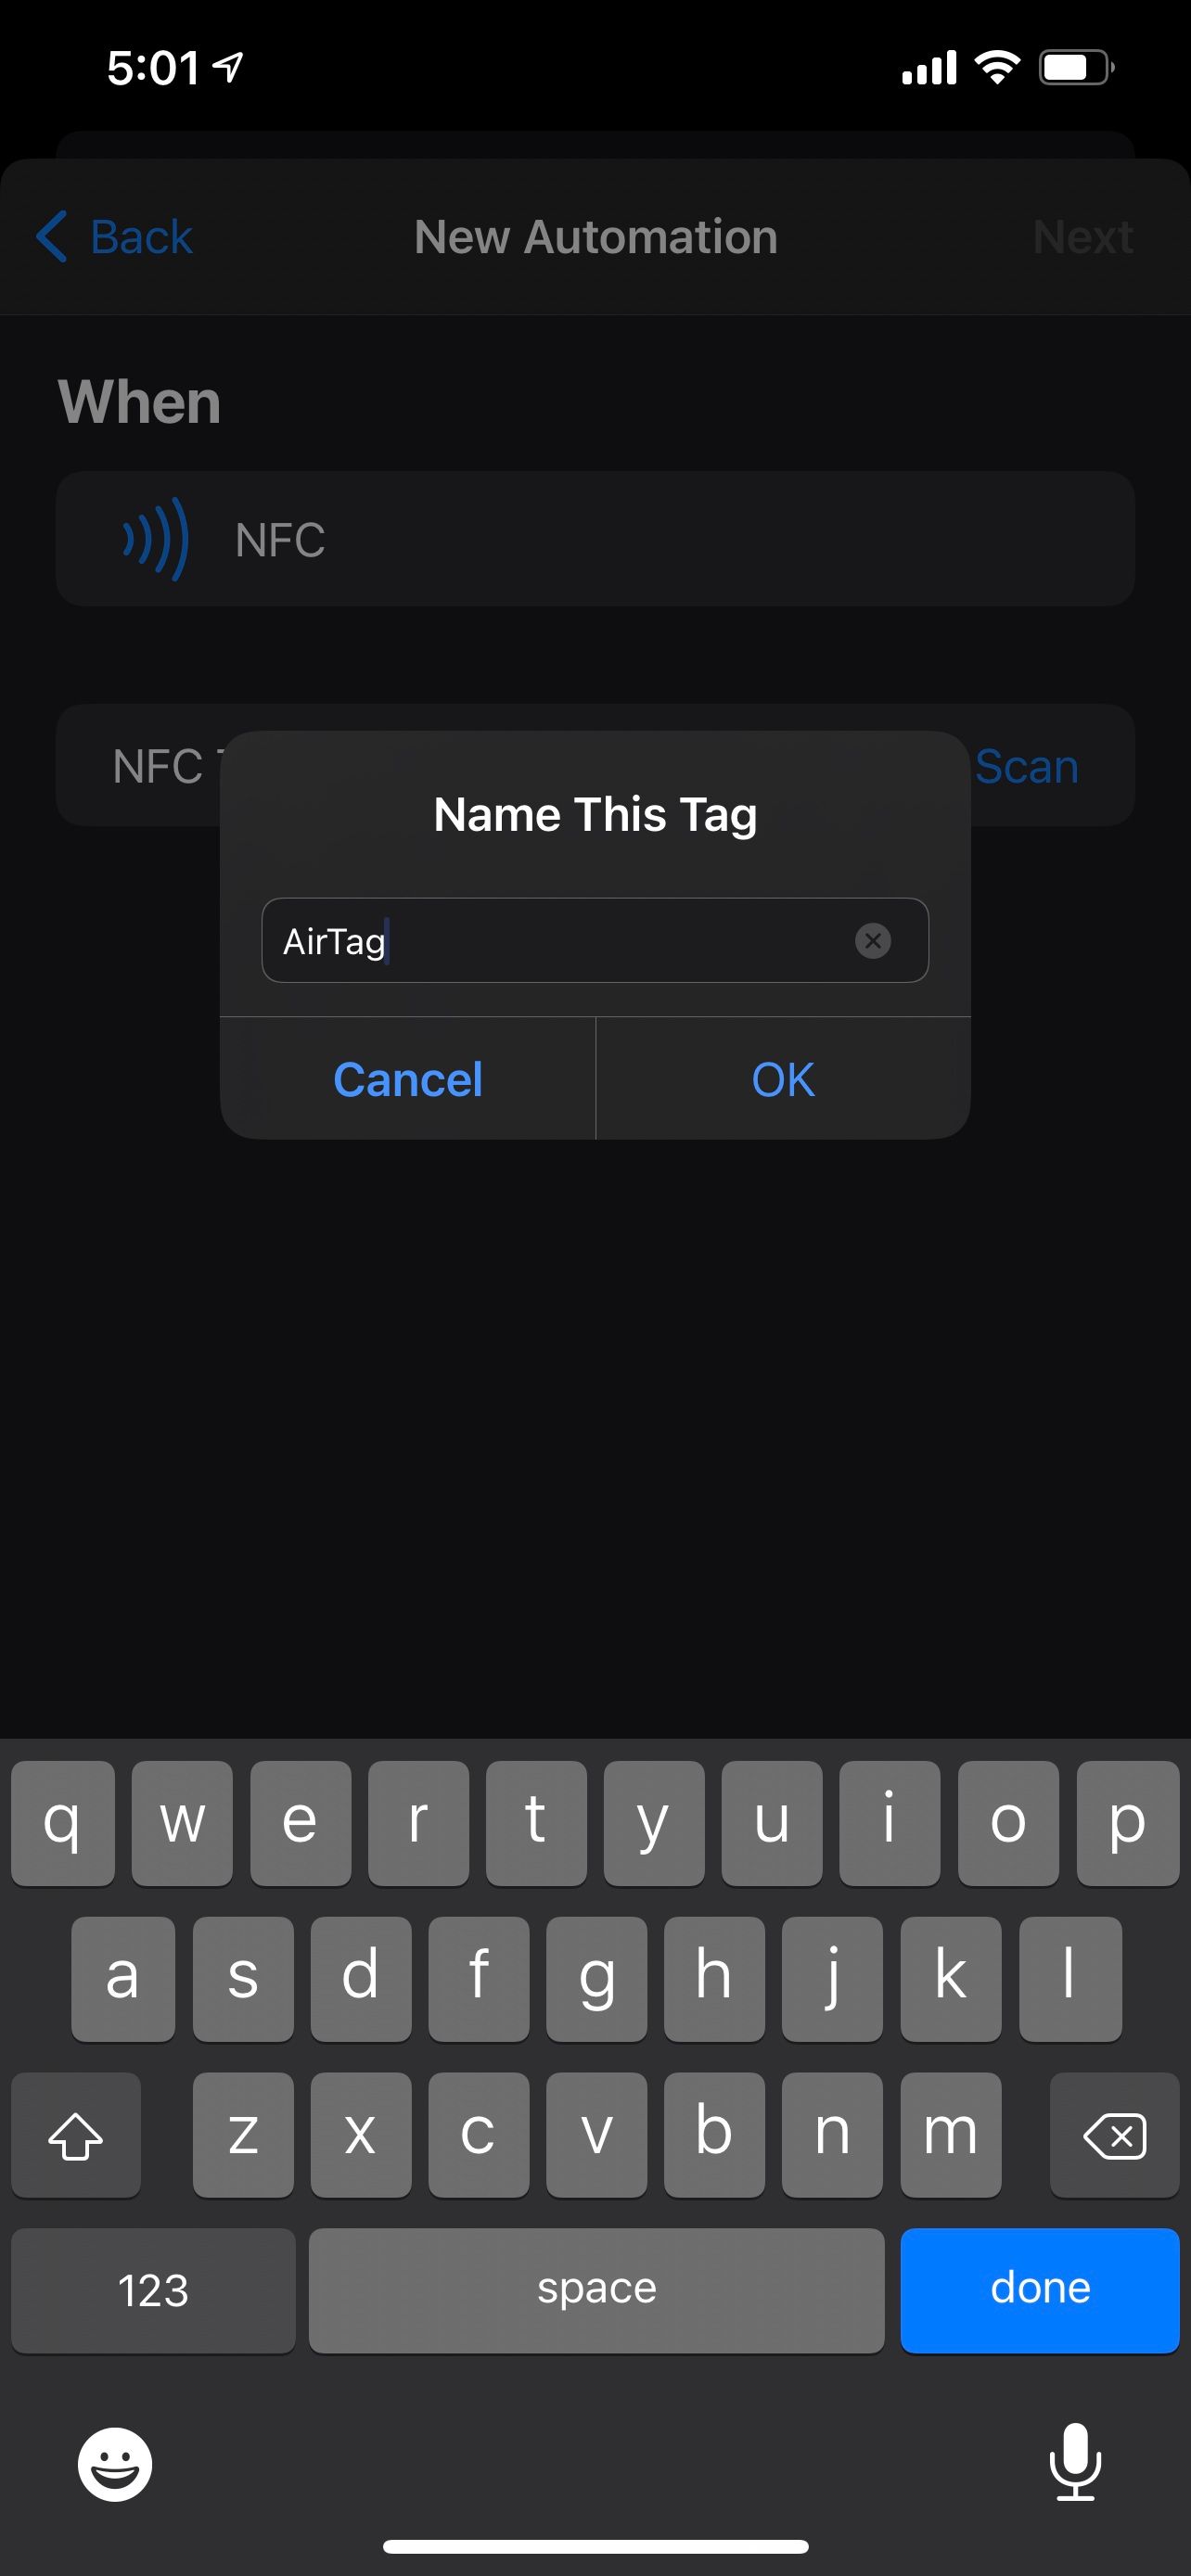 Name NFC tag for automation